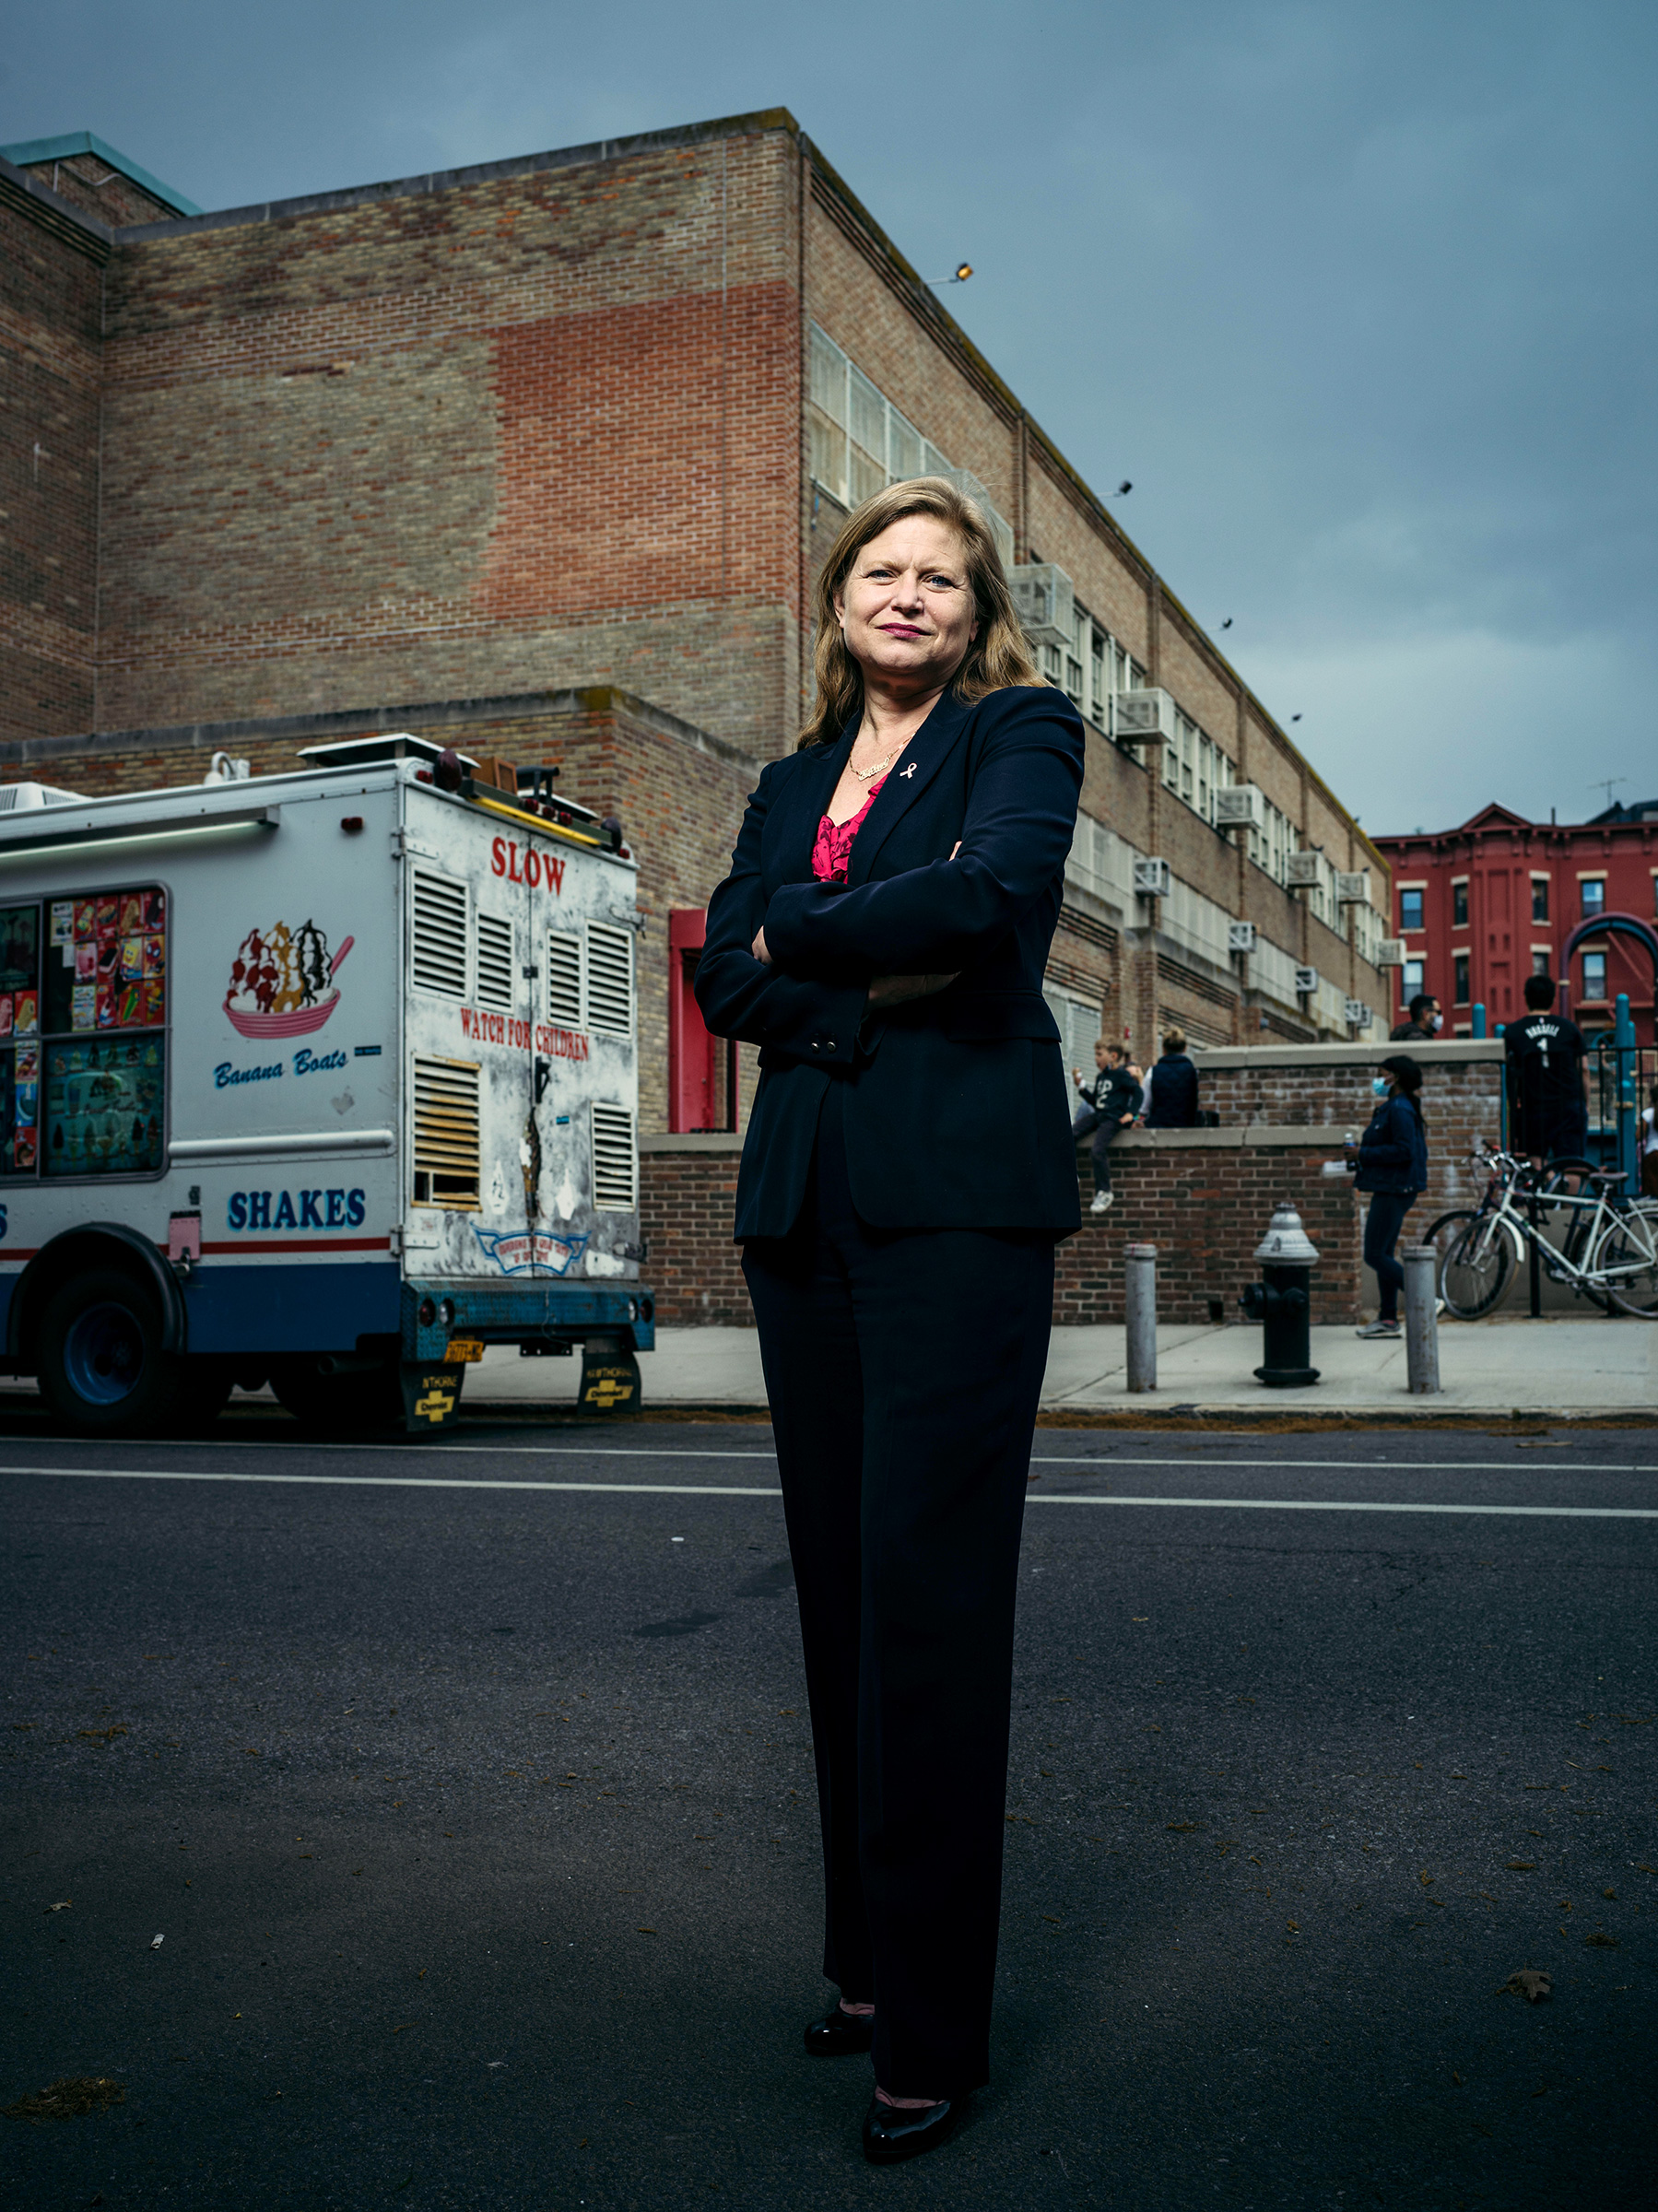 Kathryn Garcia, a longtime civil servant who served as commissioner of New York City's Sanitation Department, in Brooklyn on April 30, 2021. (Damon Winter/The New York Times)